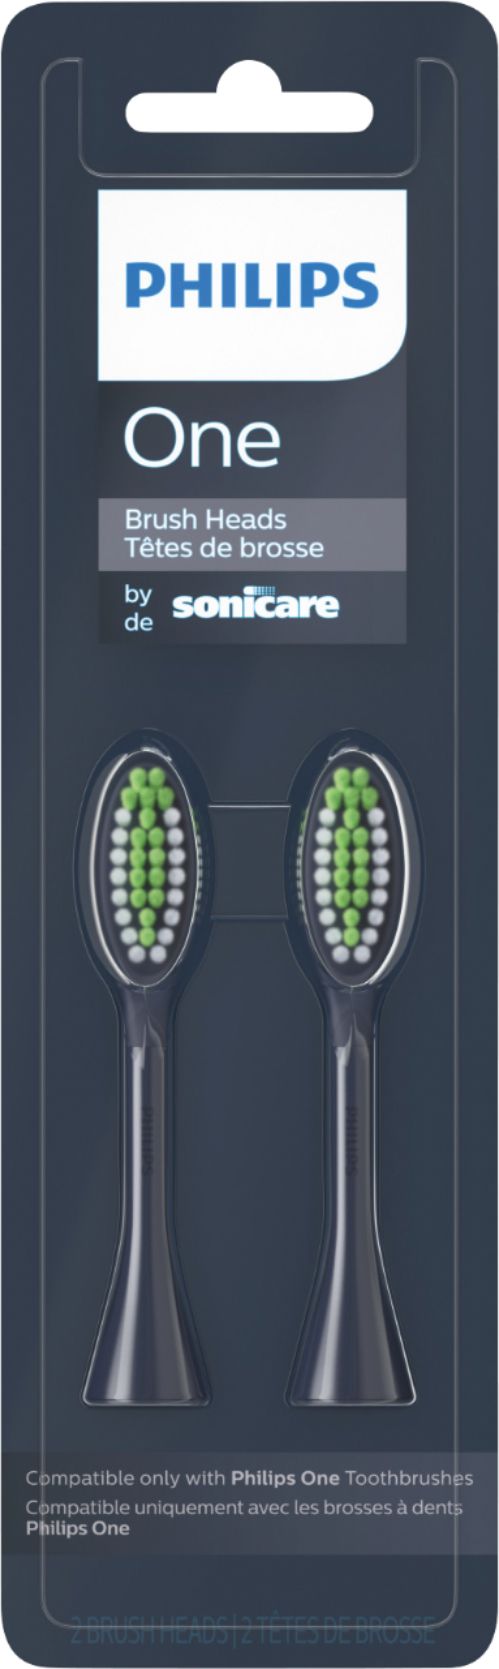 Angle View: Philips Sonicare - Philips One by Sonicare 2pk Brush Heads - Midnight Navy Blue